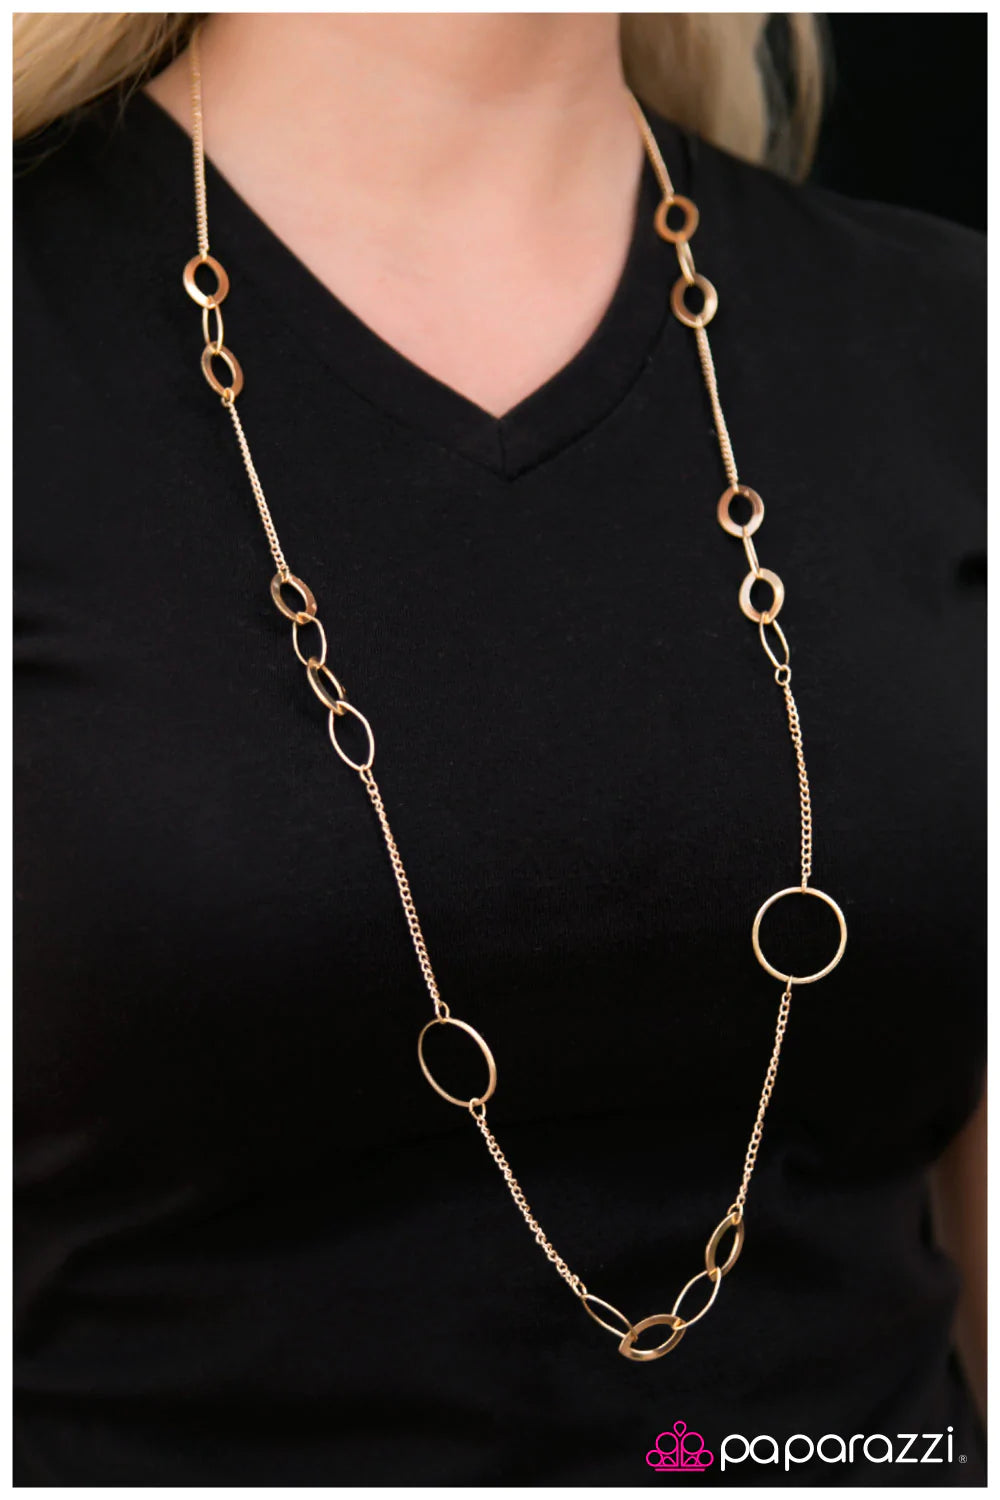 Paparazzi Necklace ~ Bare Necessities - Gold